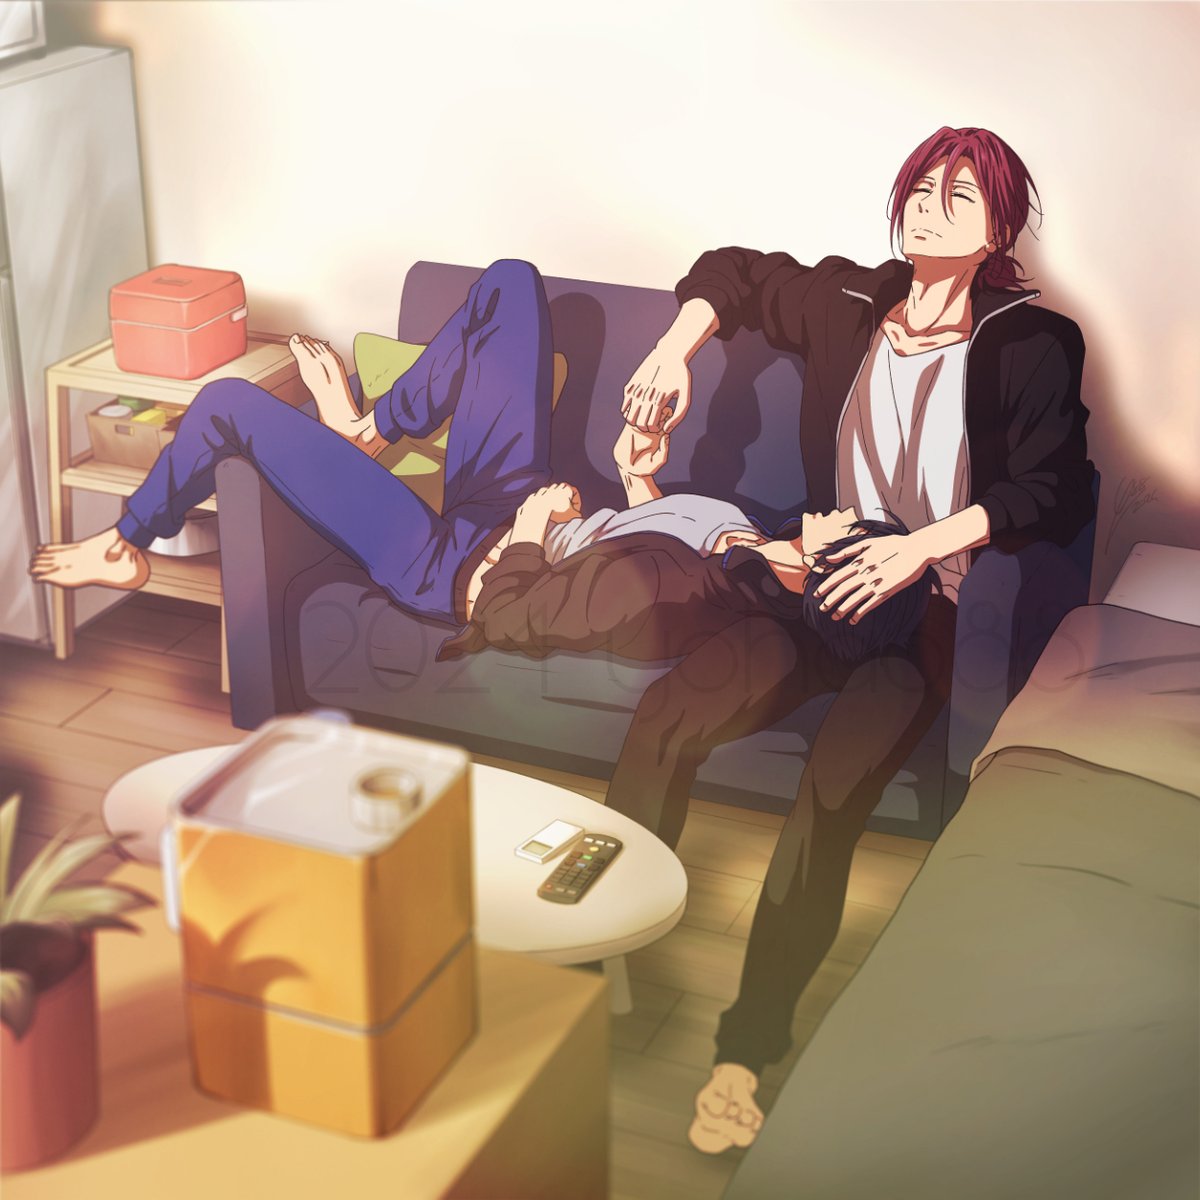 Rin's rented flat while he stays in Japan for a while.
They'll probably spend a lot of (quality) time, there. ~♥

#harurin #rinharu #遙凛 #凛遙 #七瀬遙 #松岡凛 #harukananase #rinmatsuoka #patreon